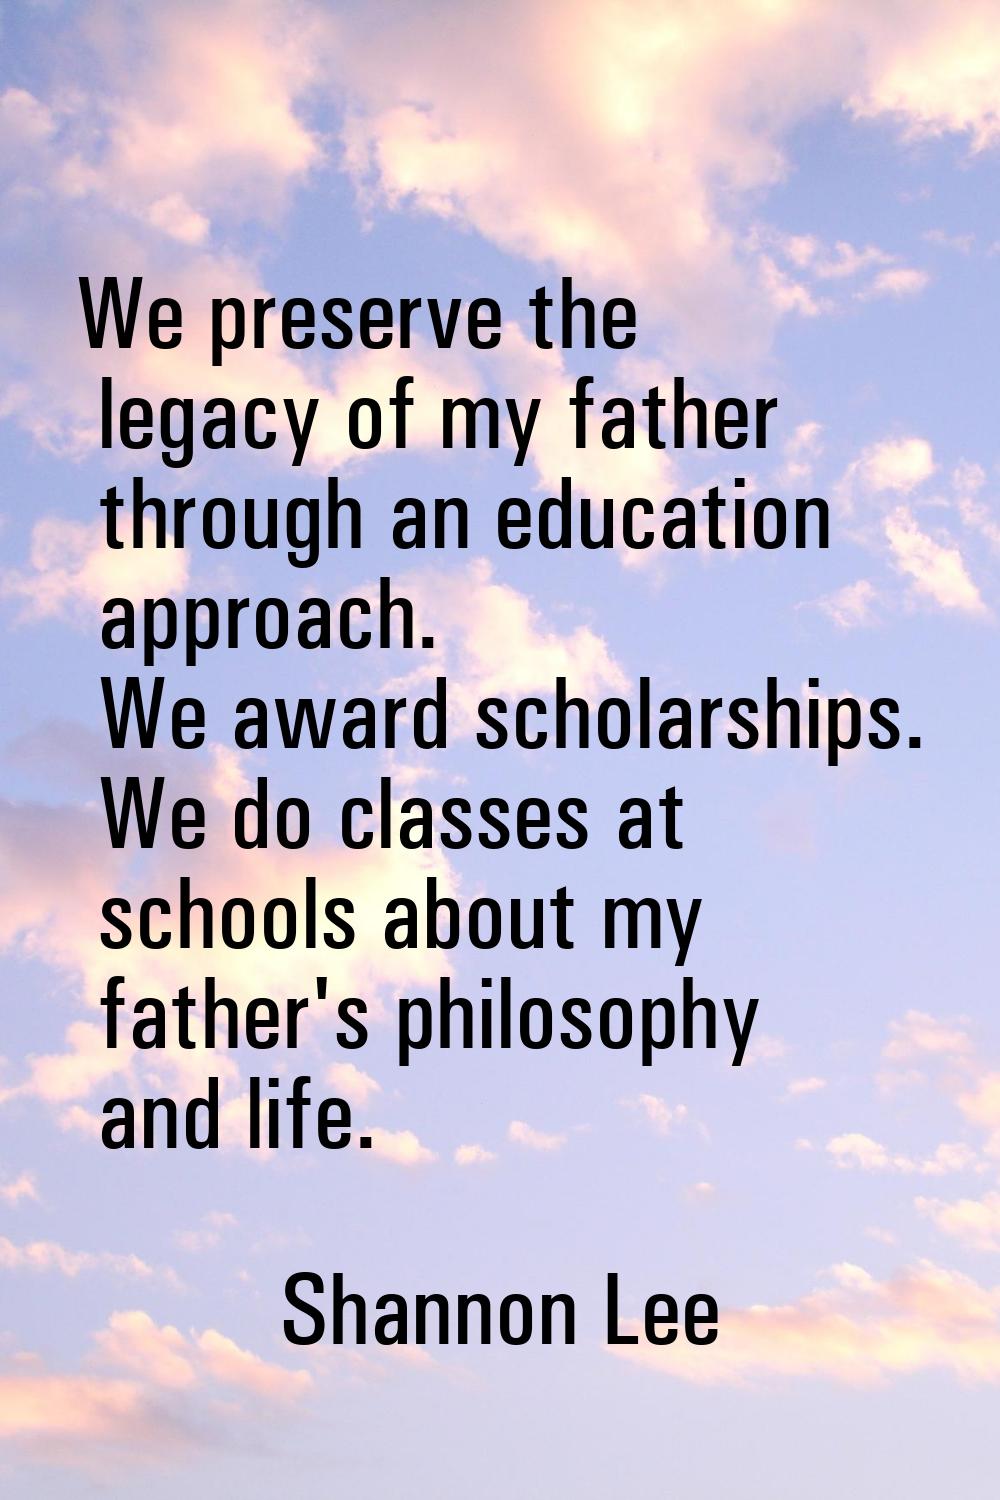 We preserve the legacy of my father through an education approach. We award scholarships. We do cla